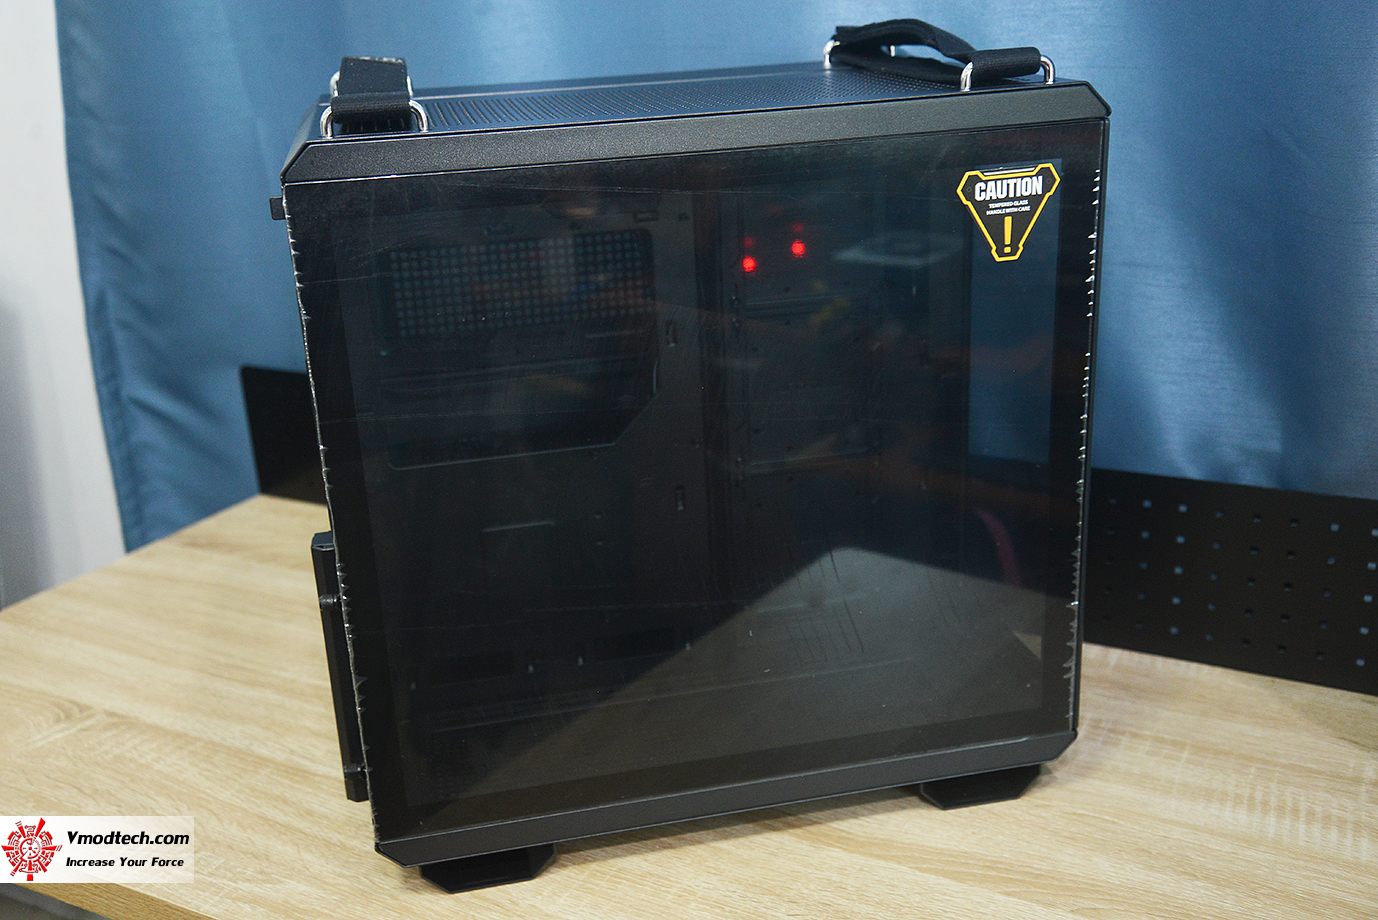 dsc 4717 ASUS TUF GAMING GT502 GAMING CASES REVIEW